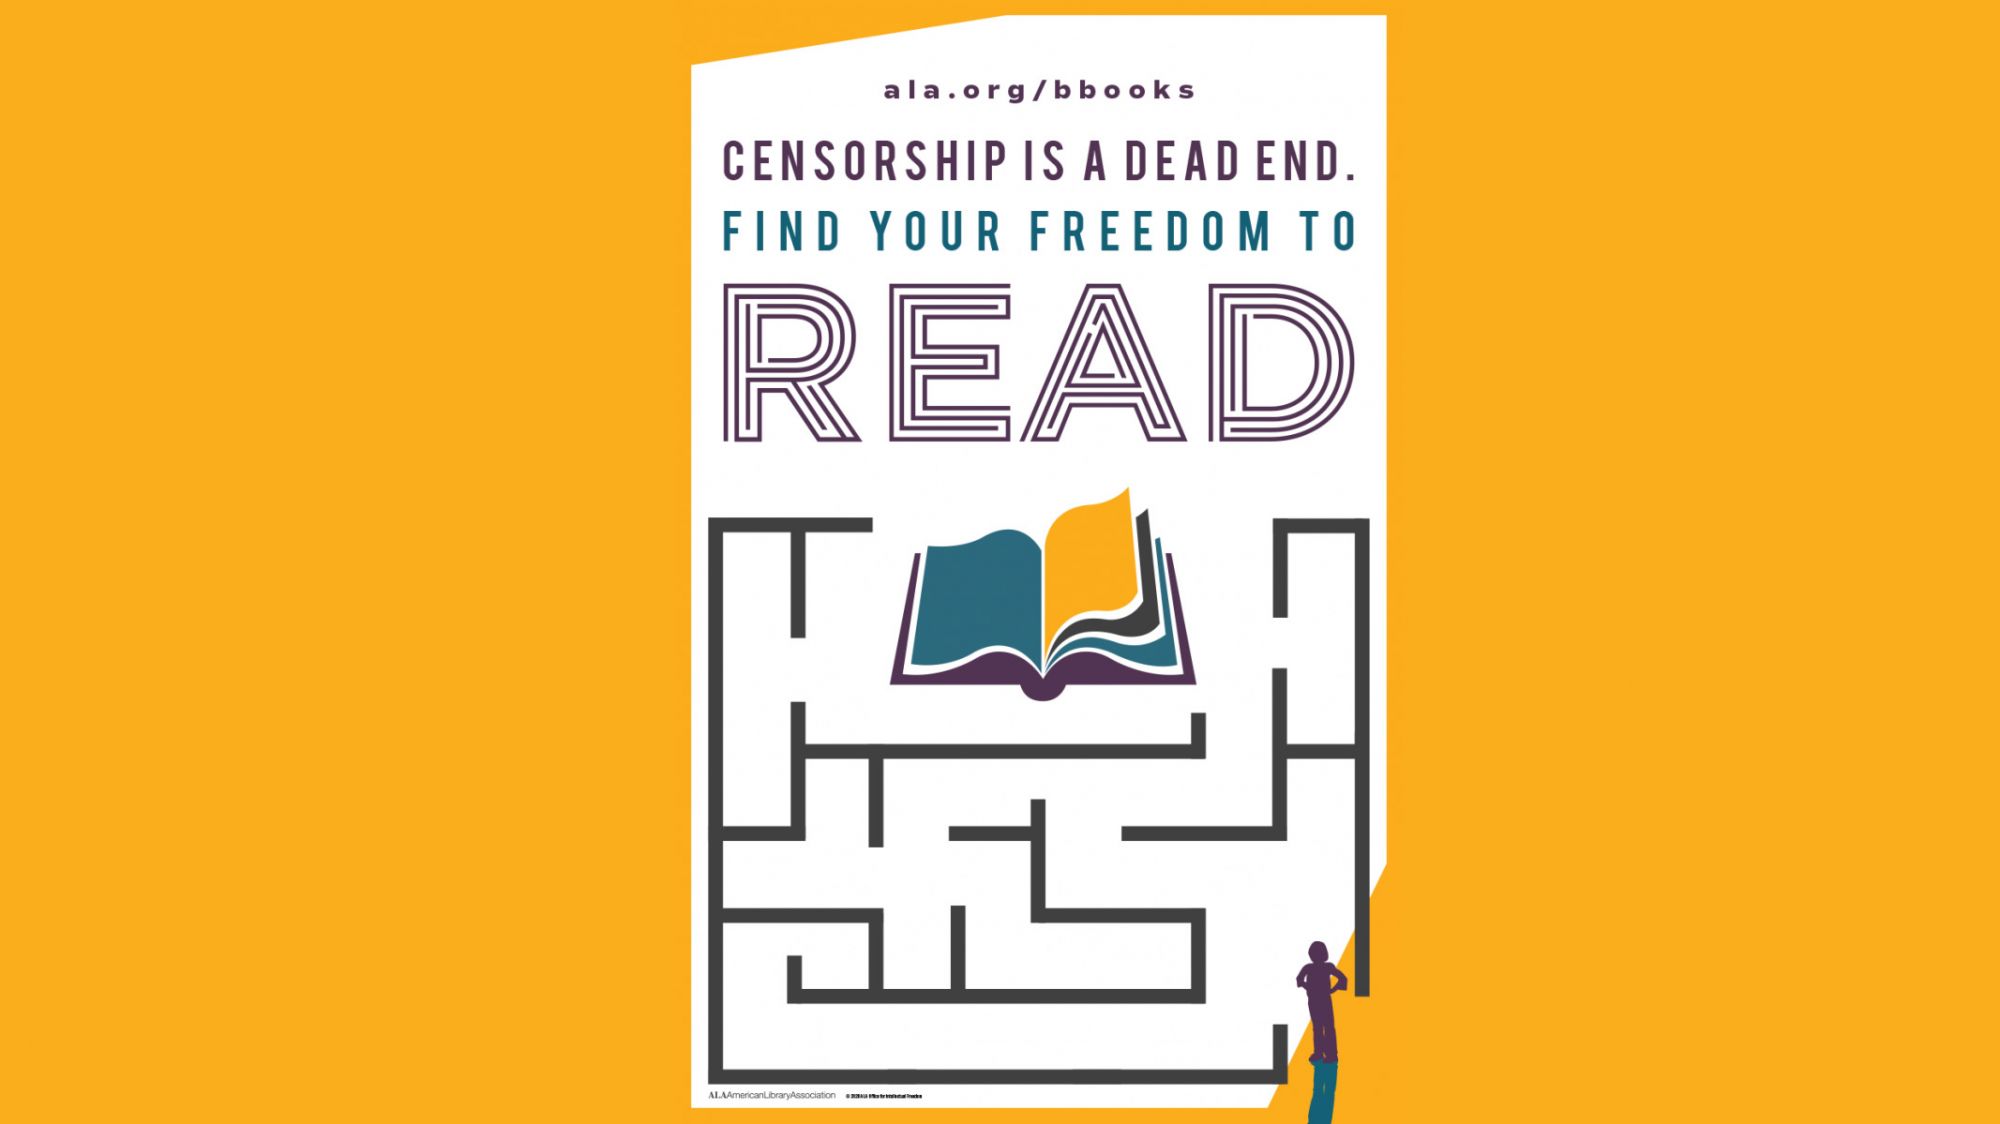 Censorship is a dead end. Find your freedom to read.